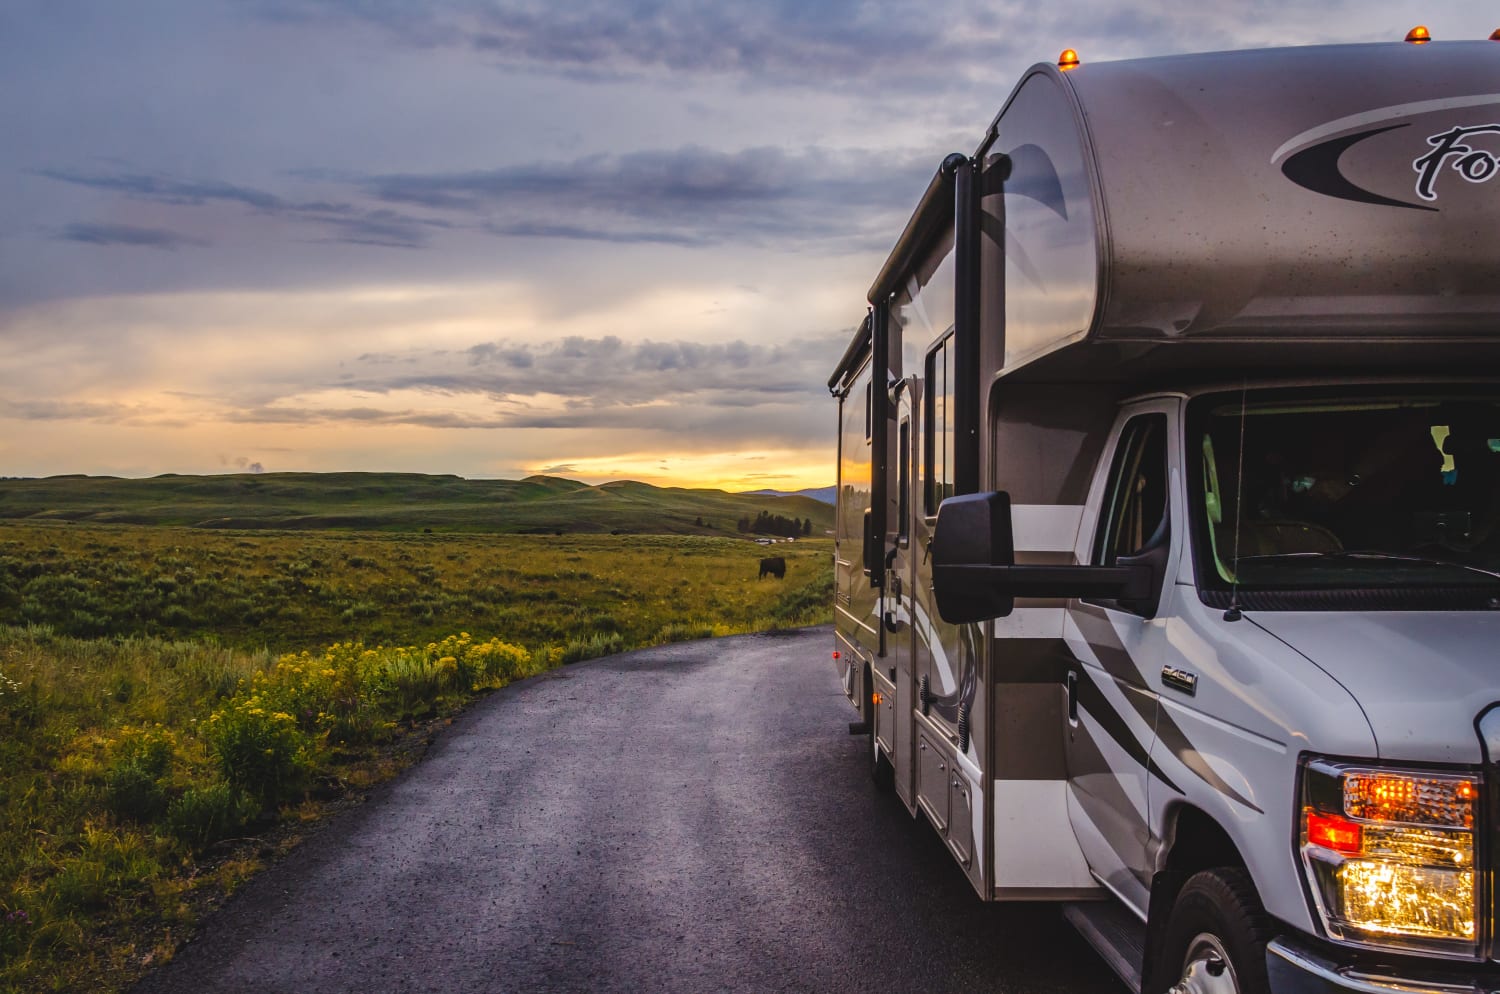 What are the safest ways to vacation this summer? From hitting the road in an RV to renting a beach house